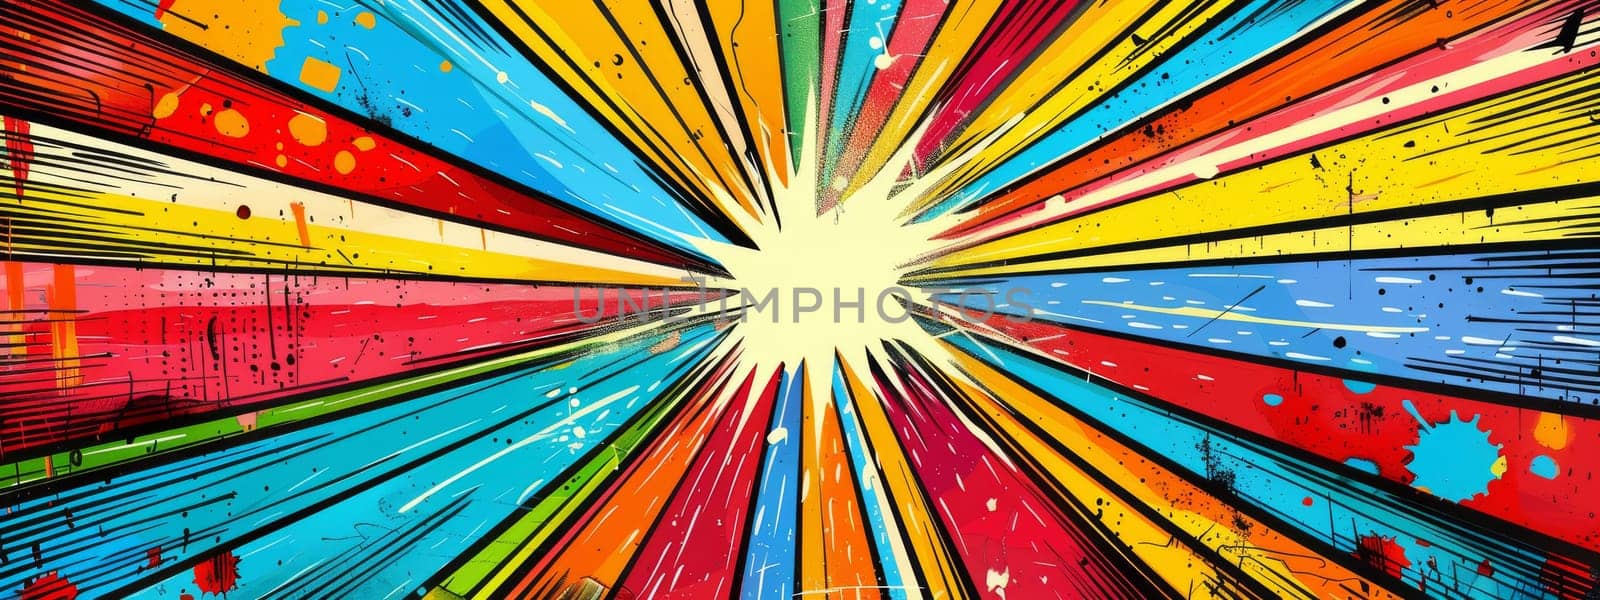 Pop art style starburst with a blue and yellow star, background and texture by Kadula